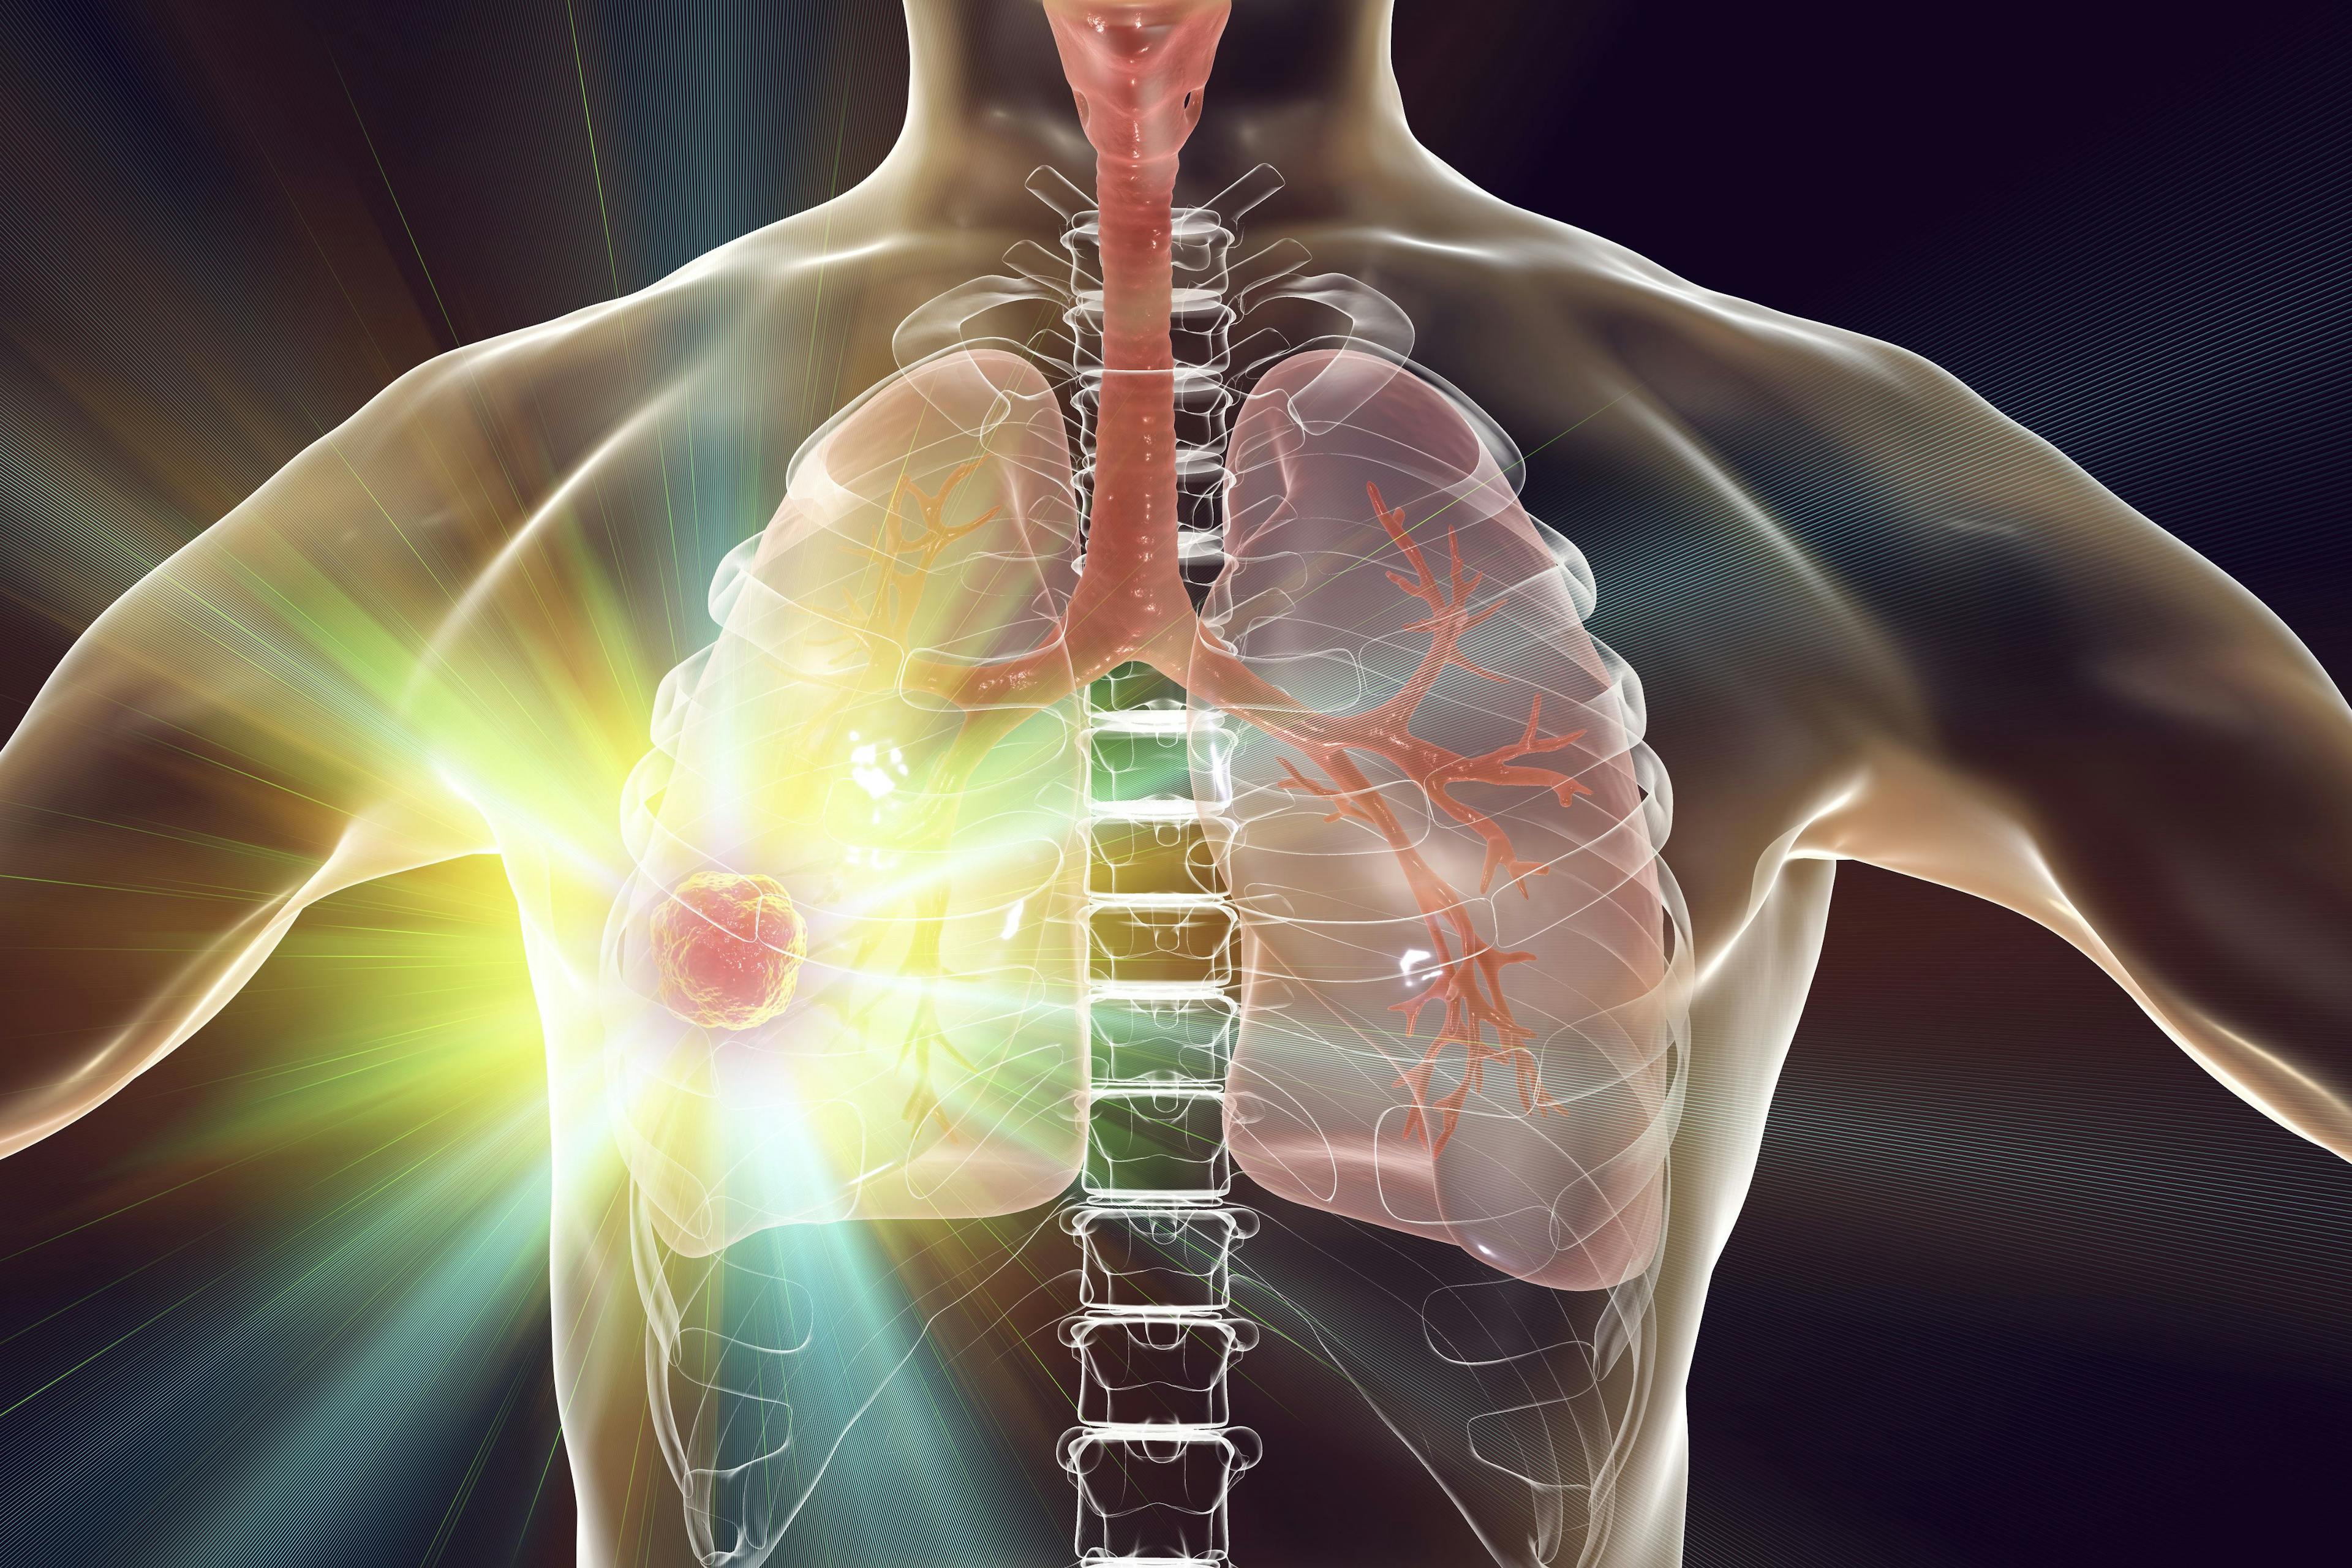 Results of the phase 3 EMPOWER-Lung 3 trial support the use of cemiplimab in advanced or metastatic non–small cell lung cancer.